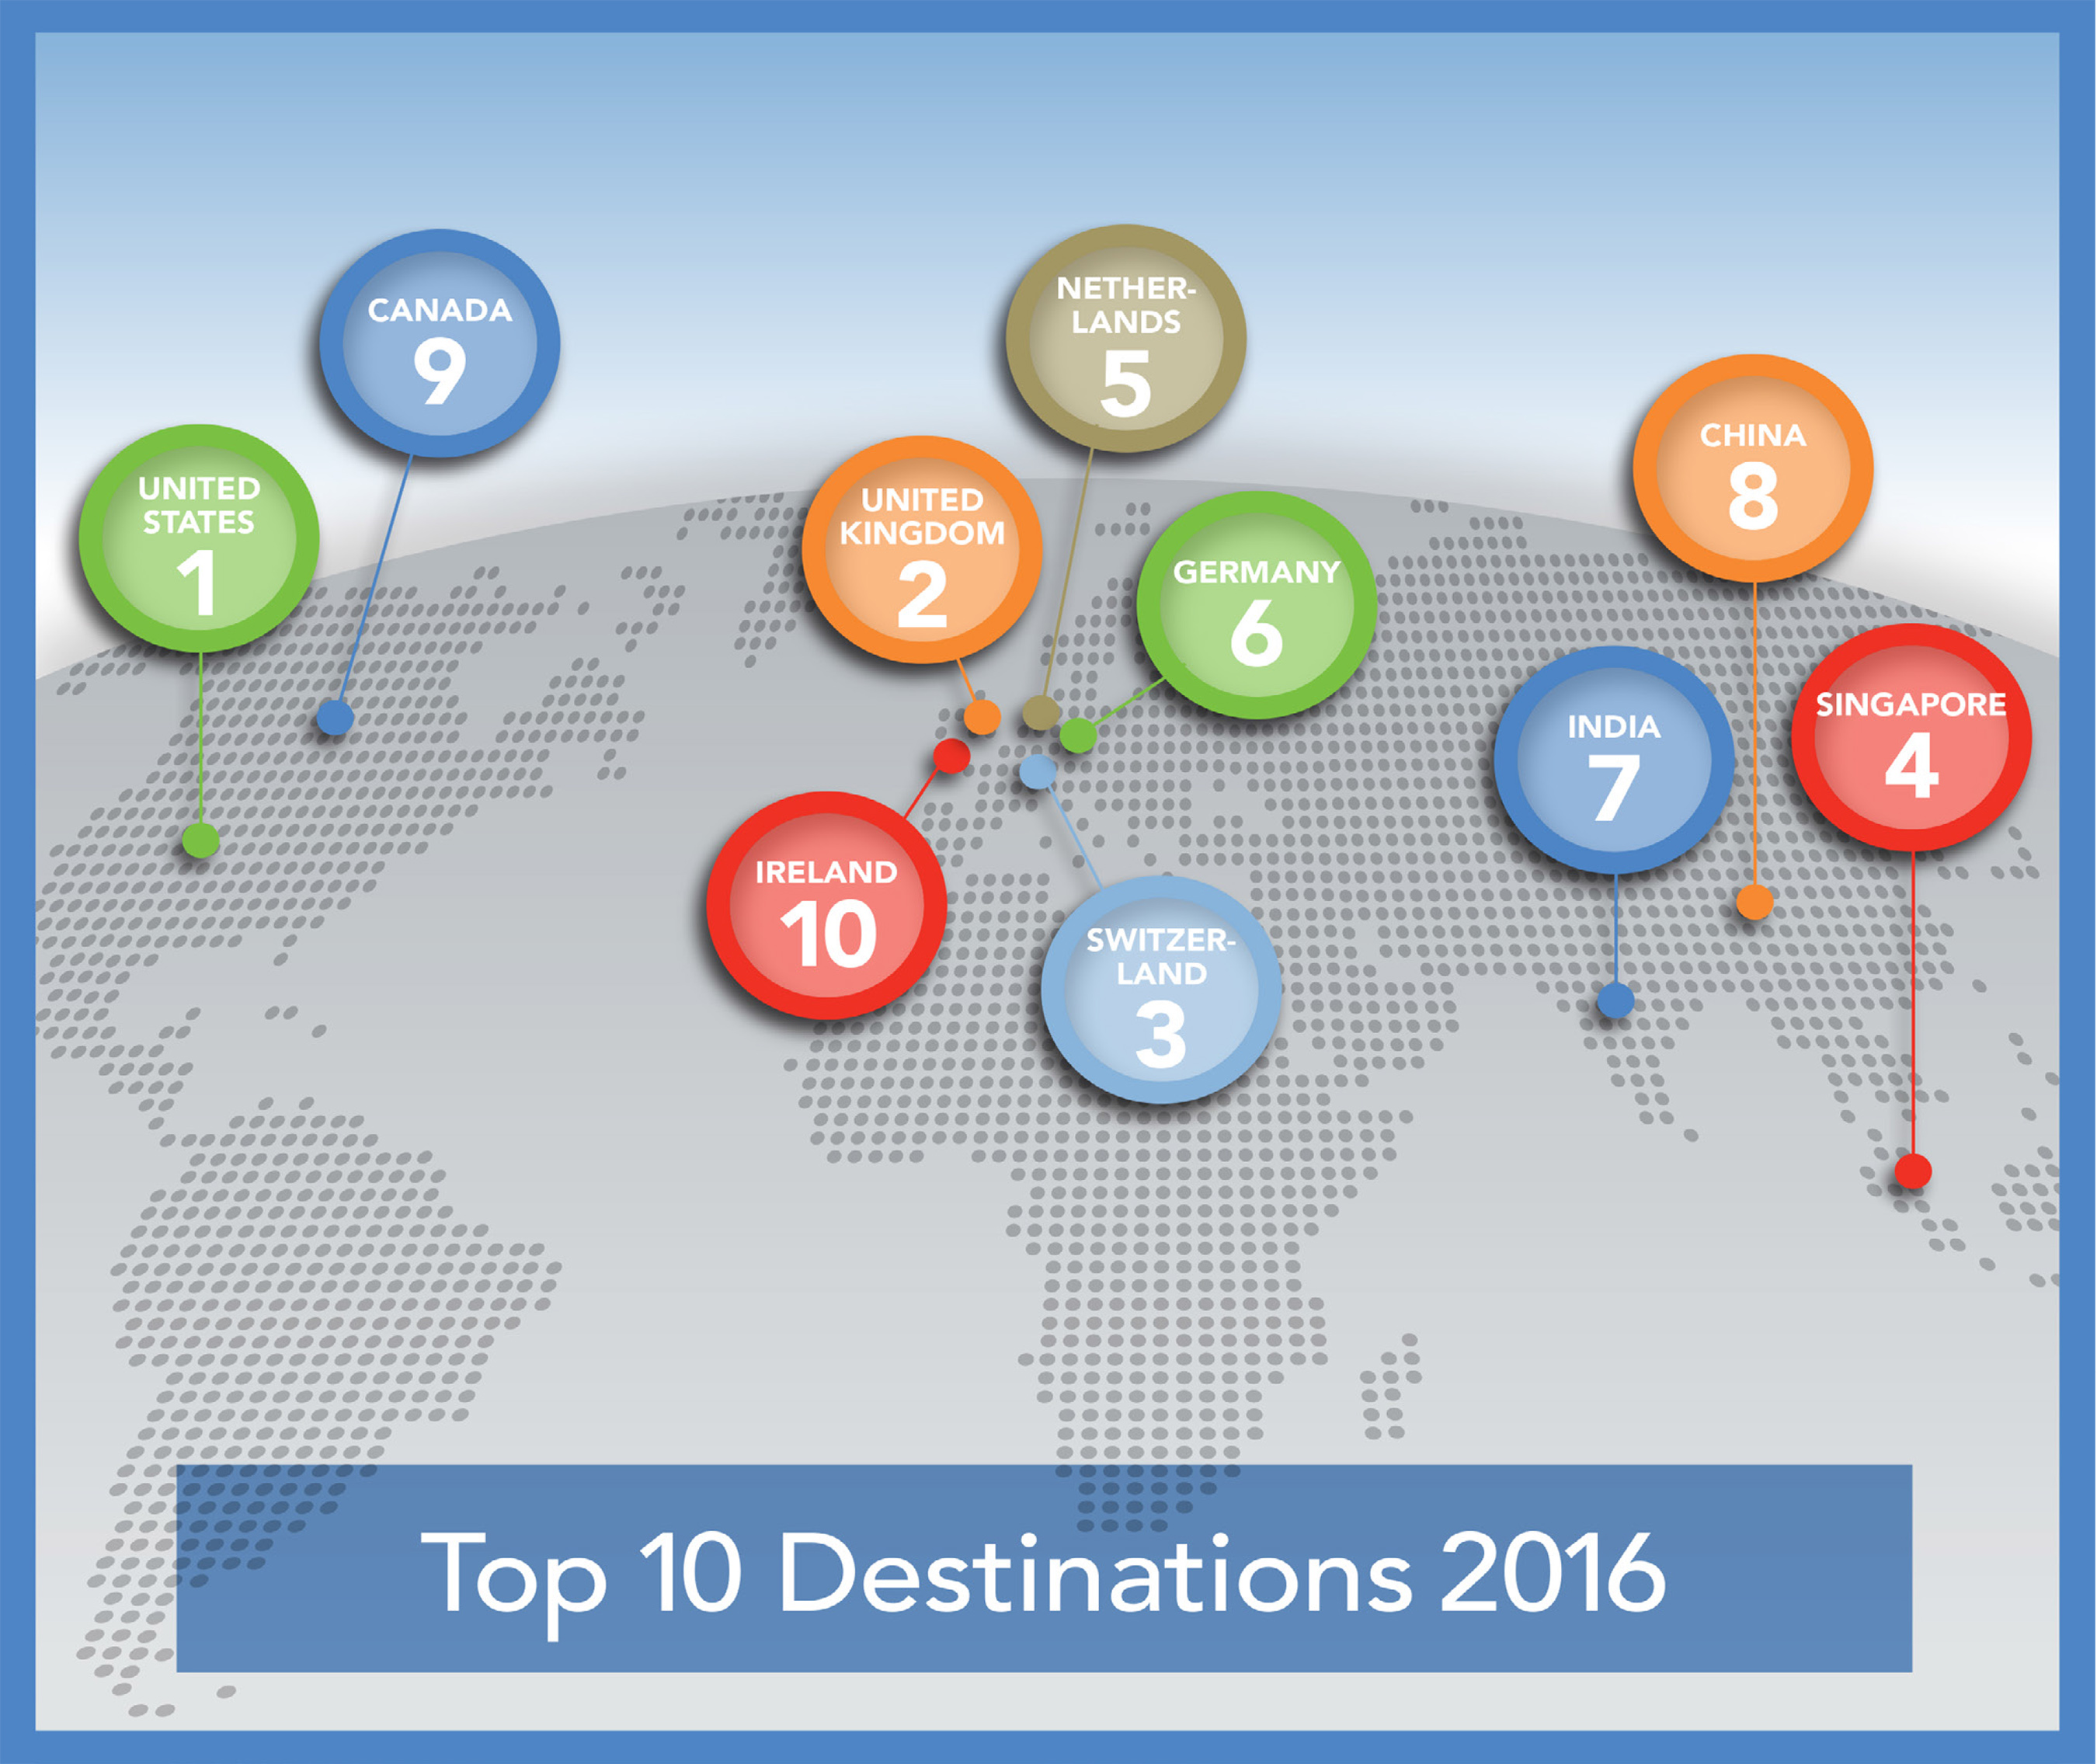 Top 10 Global Relocation Destinations: Where companies are moving their employees (Source: Cartus Corporation)